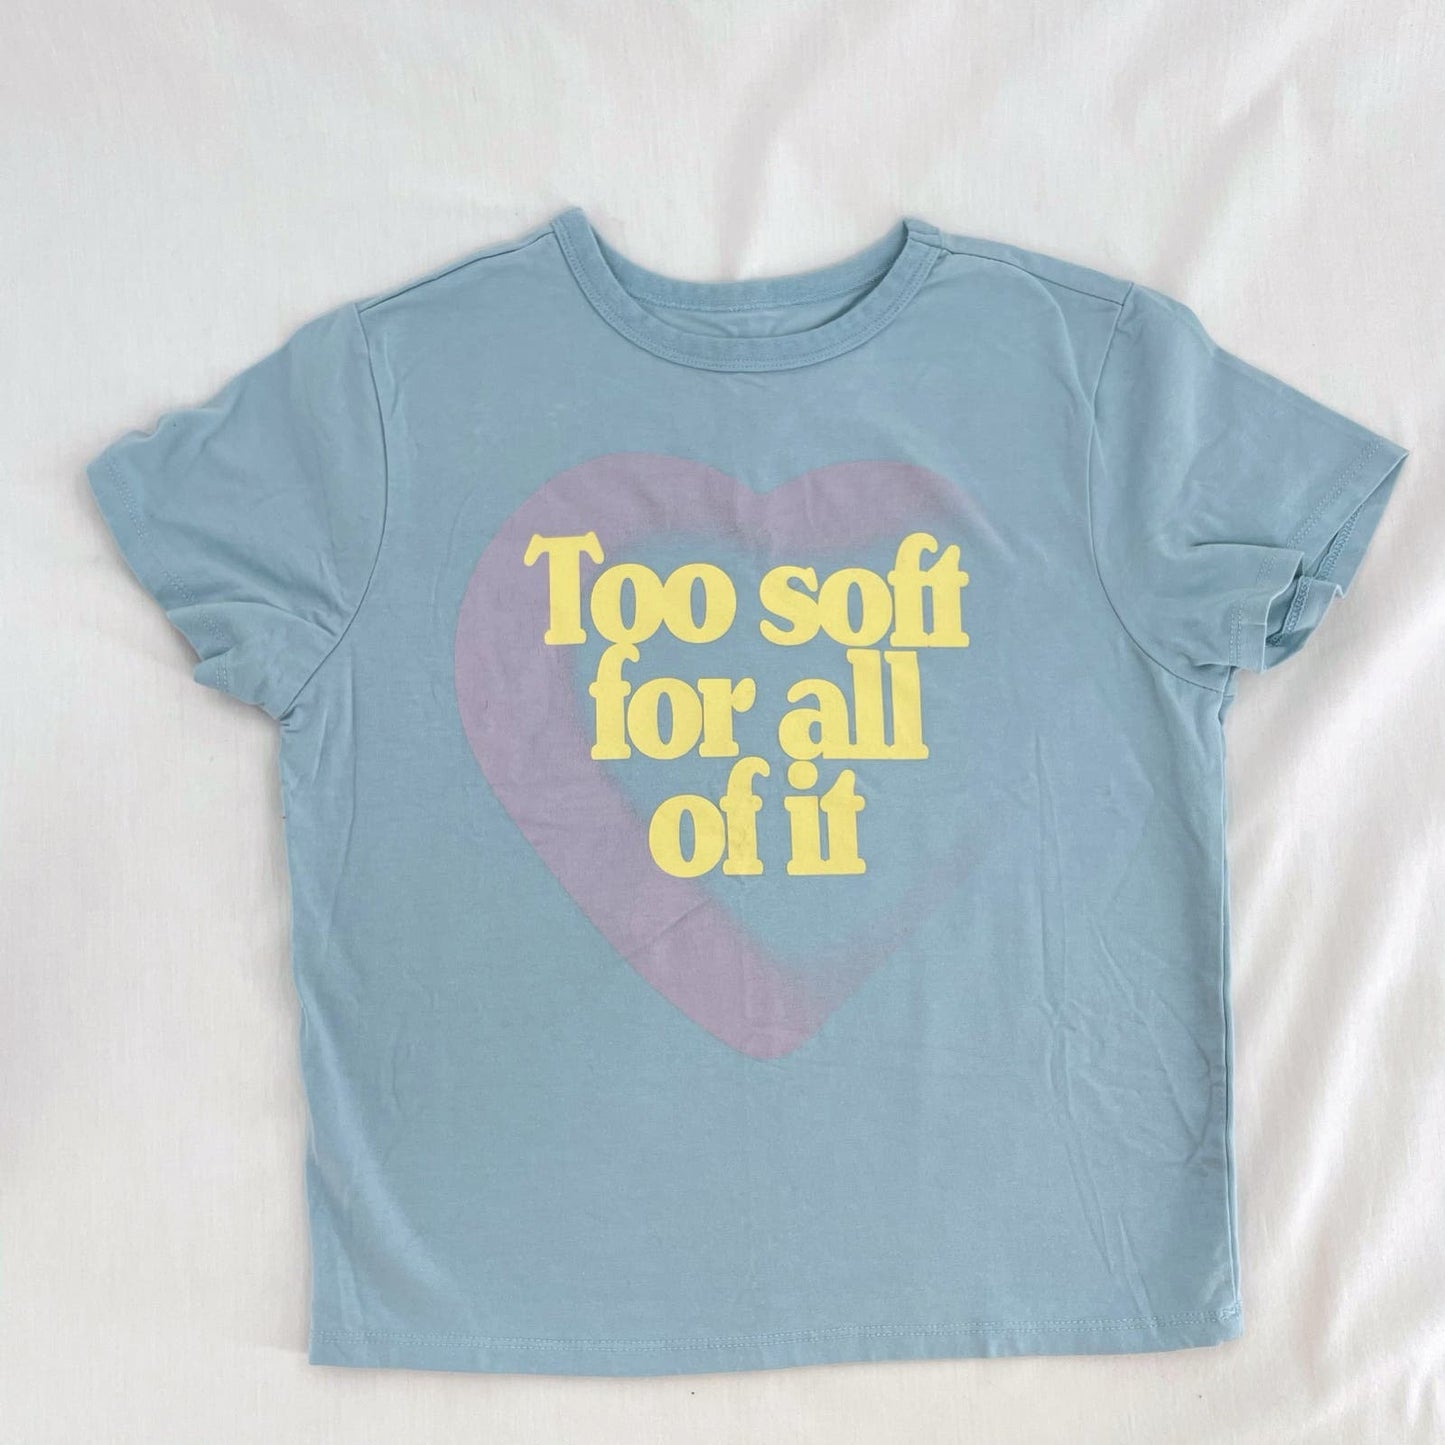 Taylor Swift Blue Baby Tee Too Soft For All Of It Sweet Nothing Midnights Heart Size M